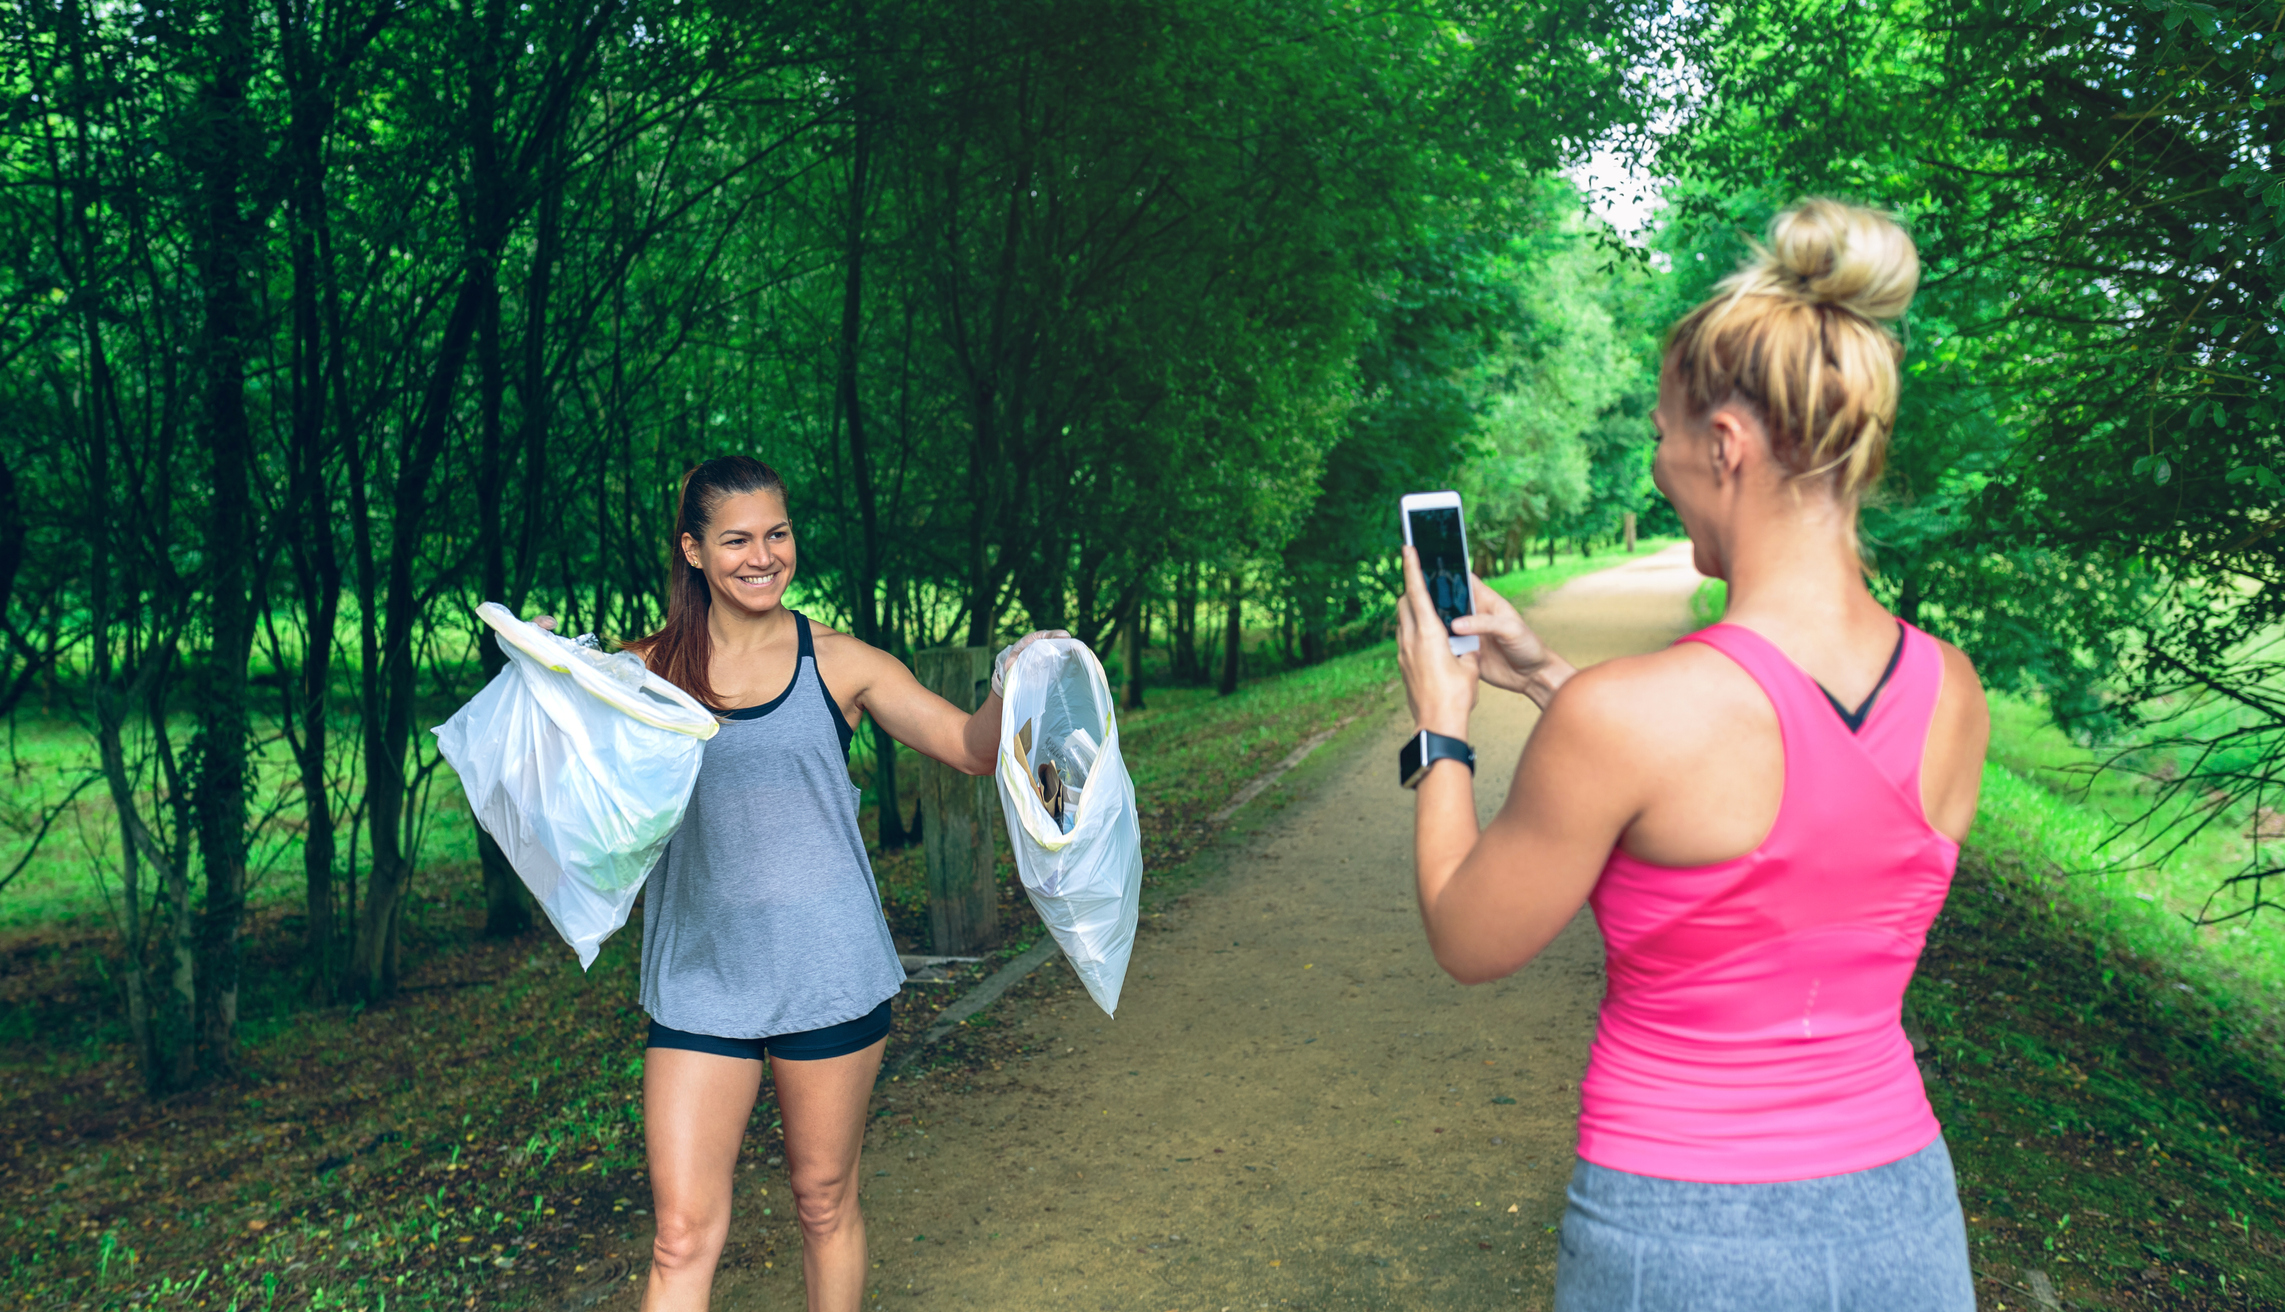 Girl taking a picture of a friend with trash bags after plogging